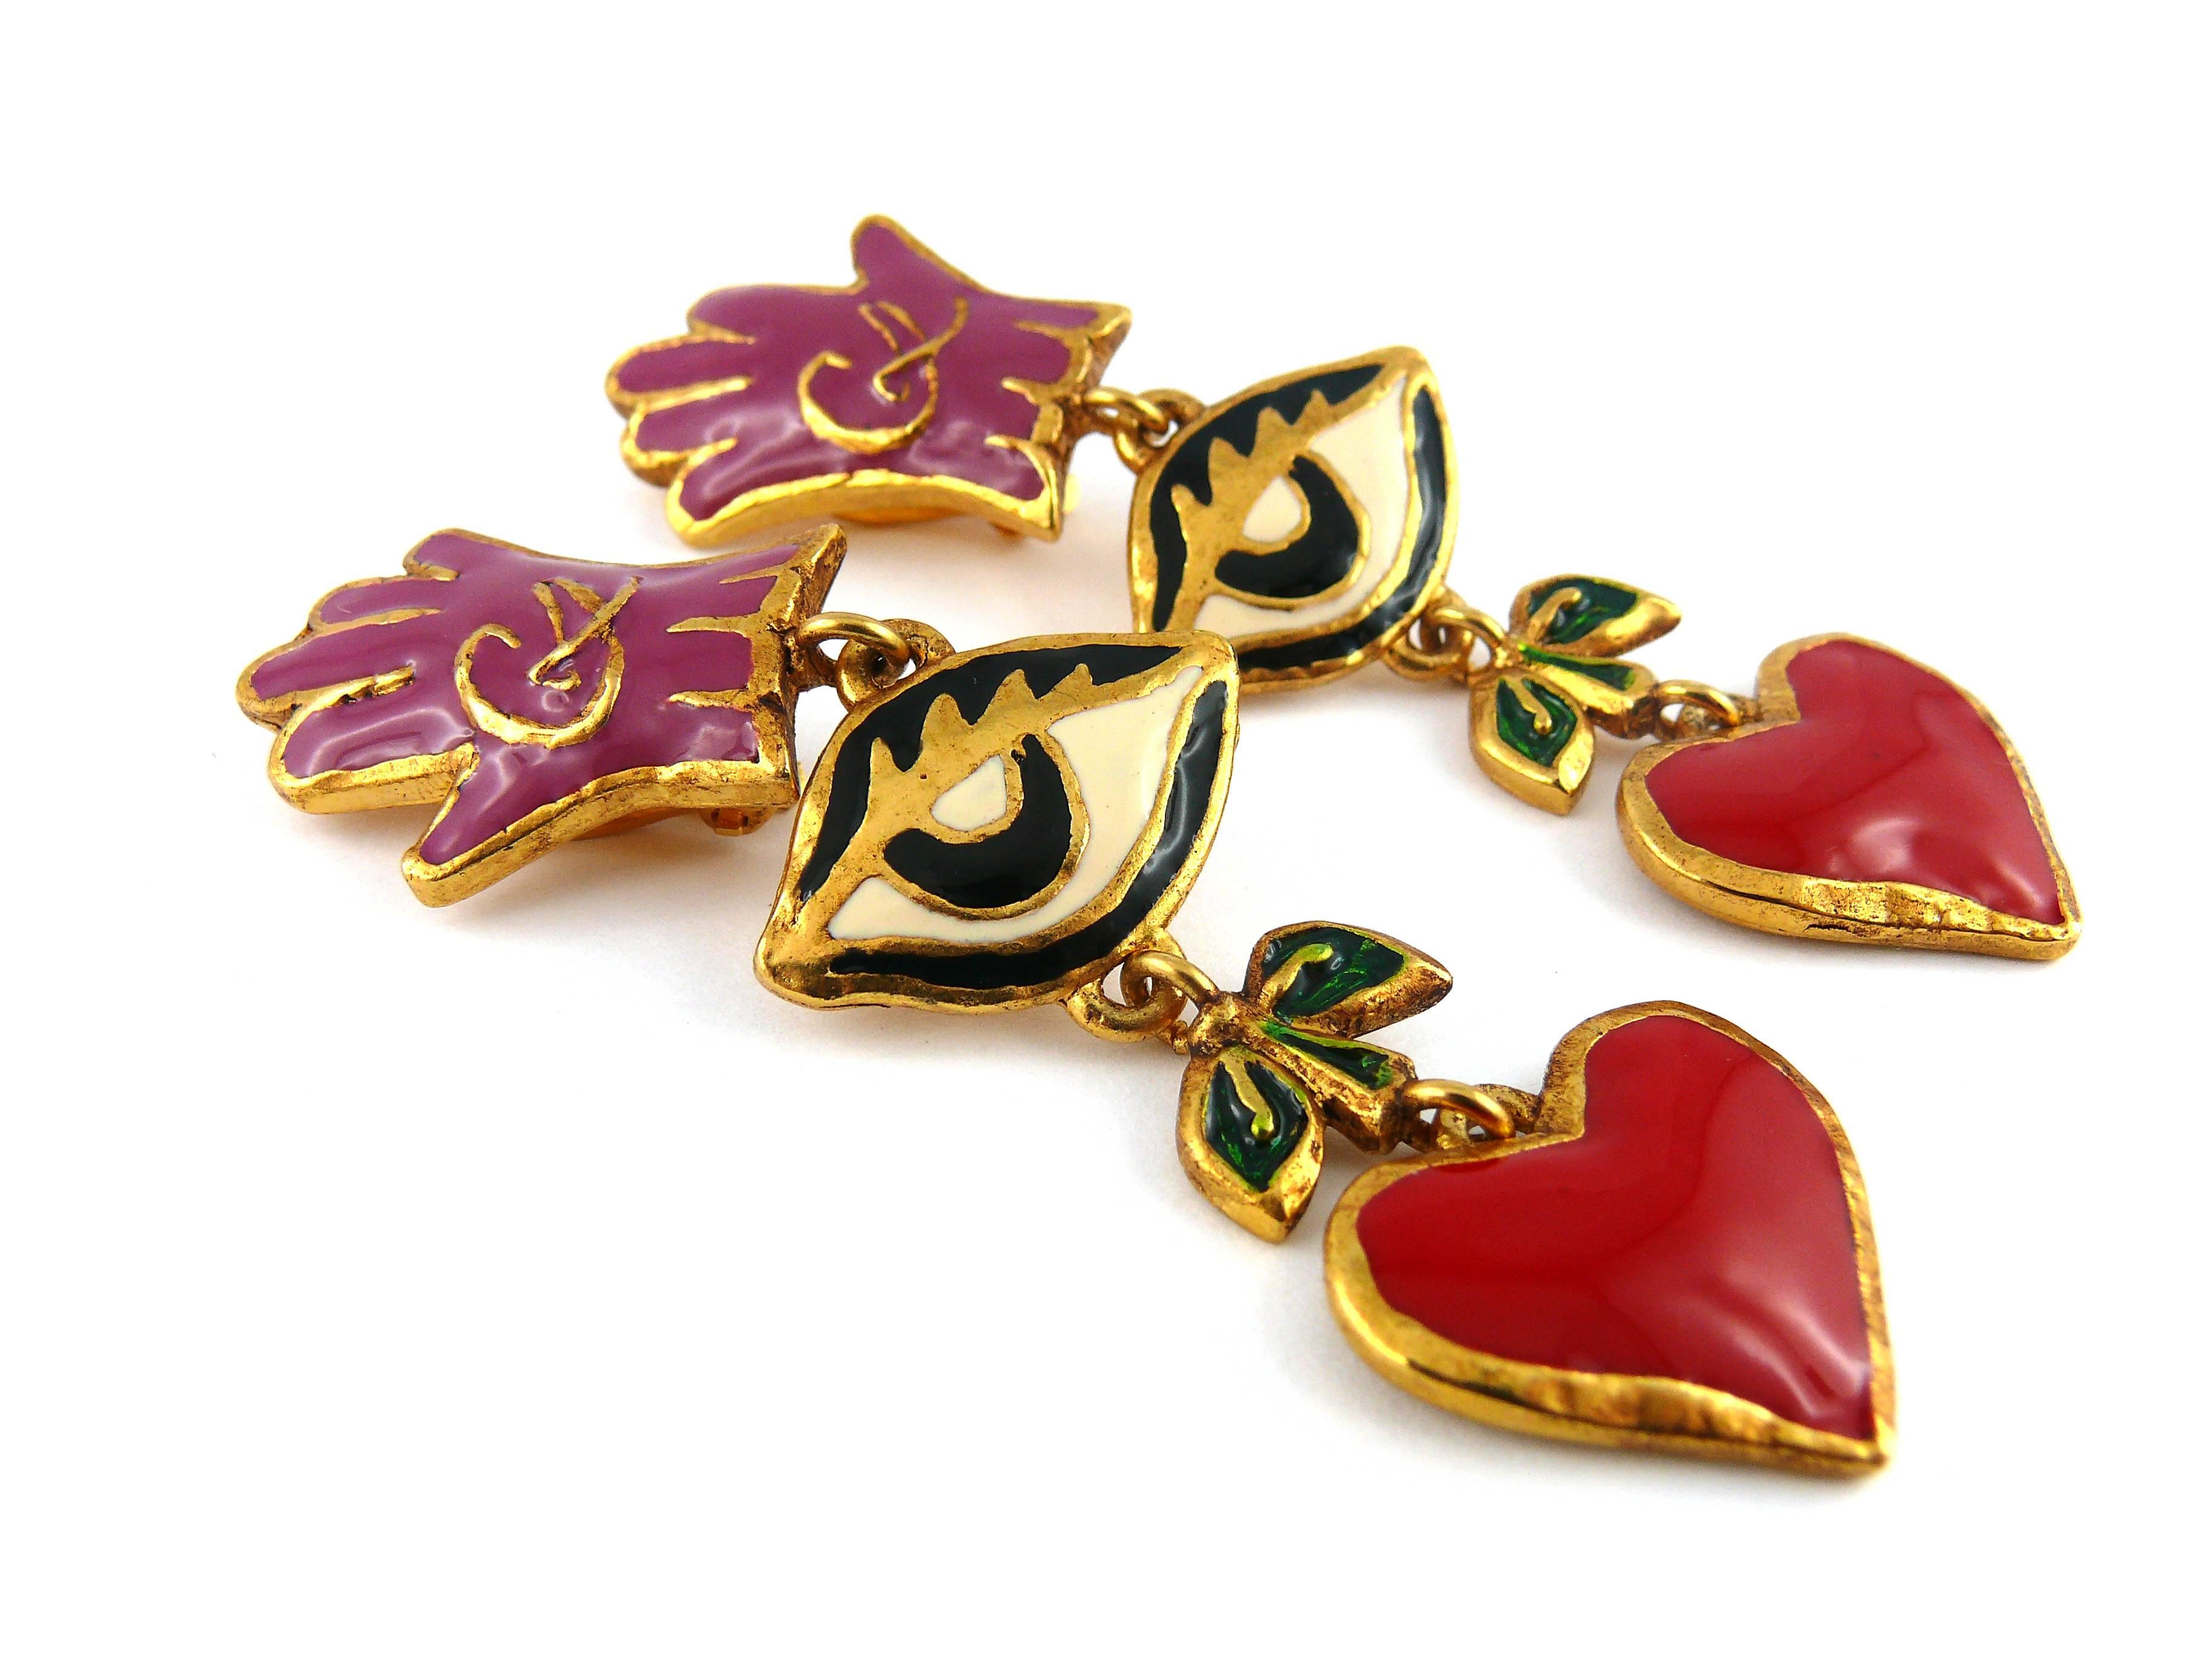 CHRISTIAN LACROIX vintage rare surreal enamel dangling earrings featuring a hand, eye and heart.

Marked CHRISTIAN LACROIX CL Made in France.

JEWELRY CONDITION CHART
- New or never worn : item is in pristine condition with no noticeable